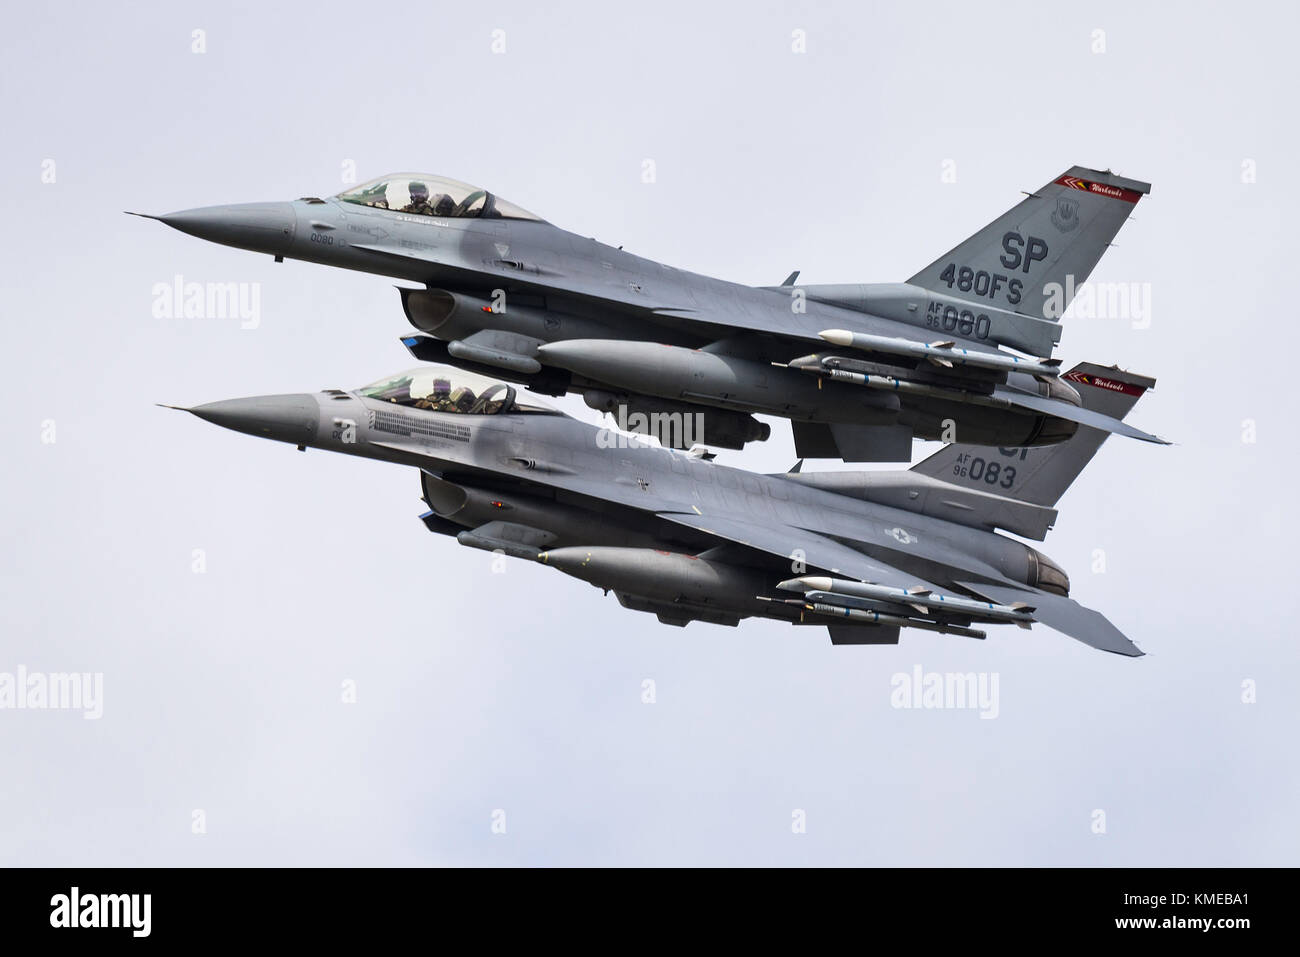 Two F-16 fighter jets of the USAF based at the Spangdahlem Air Base in Germany. Stock Photo